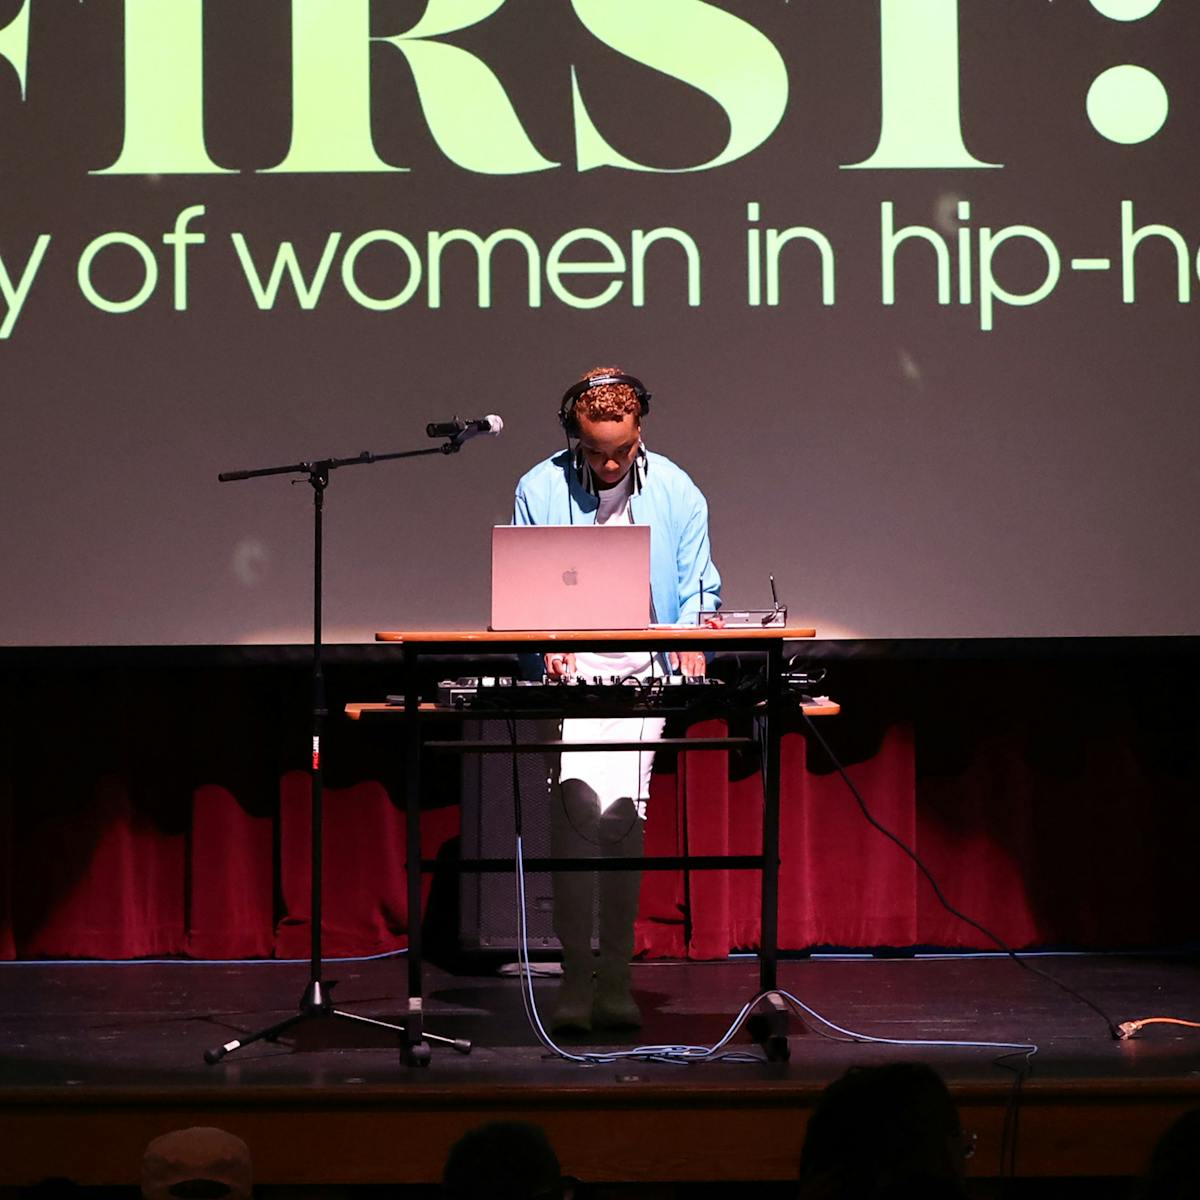 A woman appears to DJ from a laptop onstage in front of a projection of "LADIES FIRST: a story of women in hip-hop"